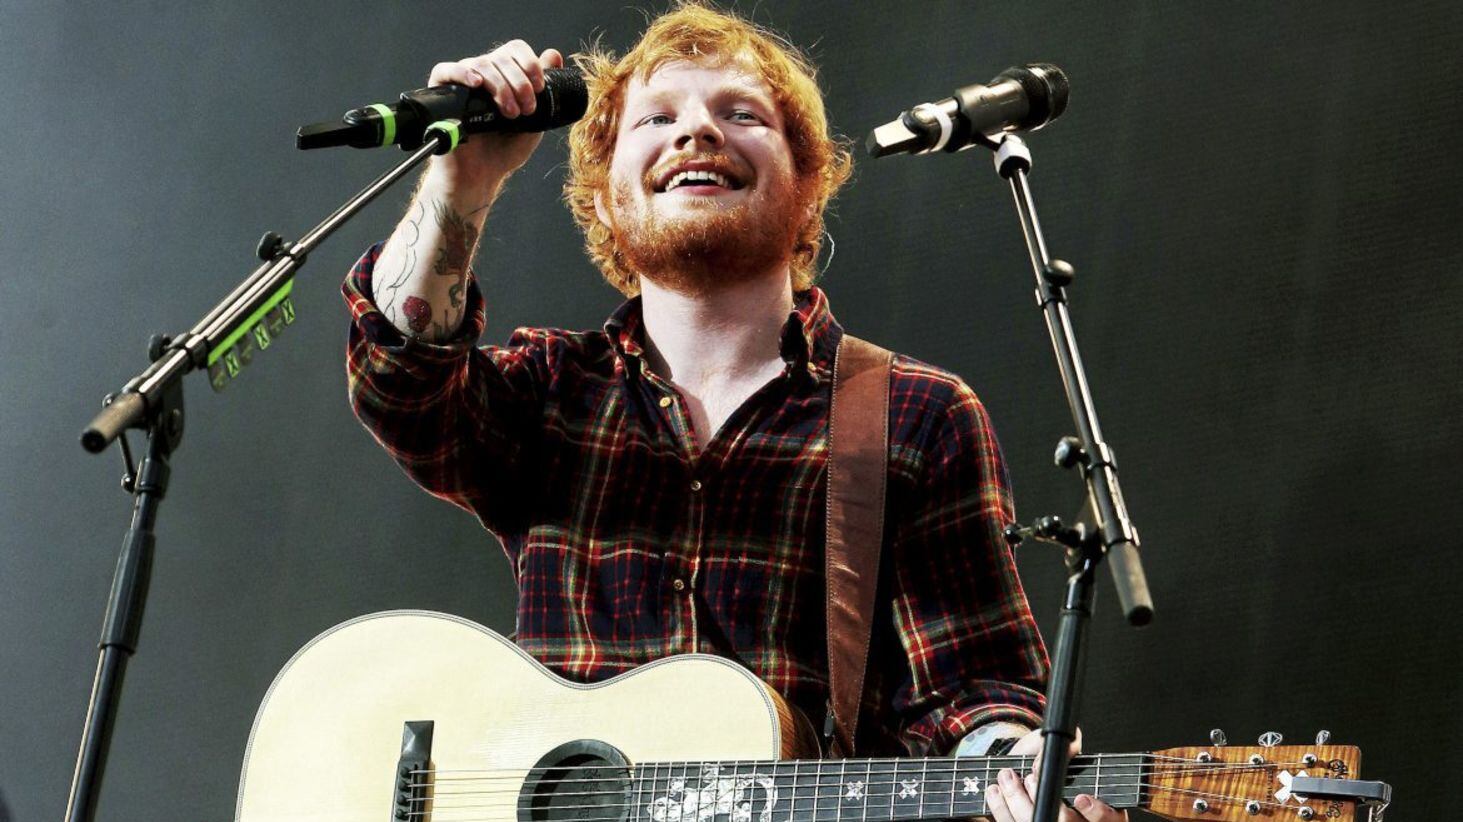 Ed Sheeran&#39;s follow-up album will need to be top notch after the roaring success of X 